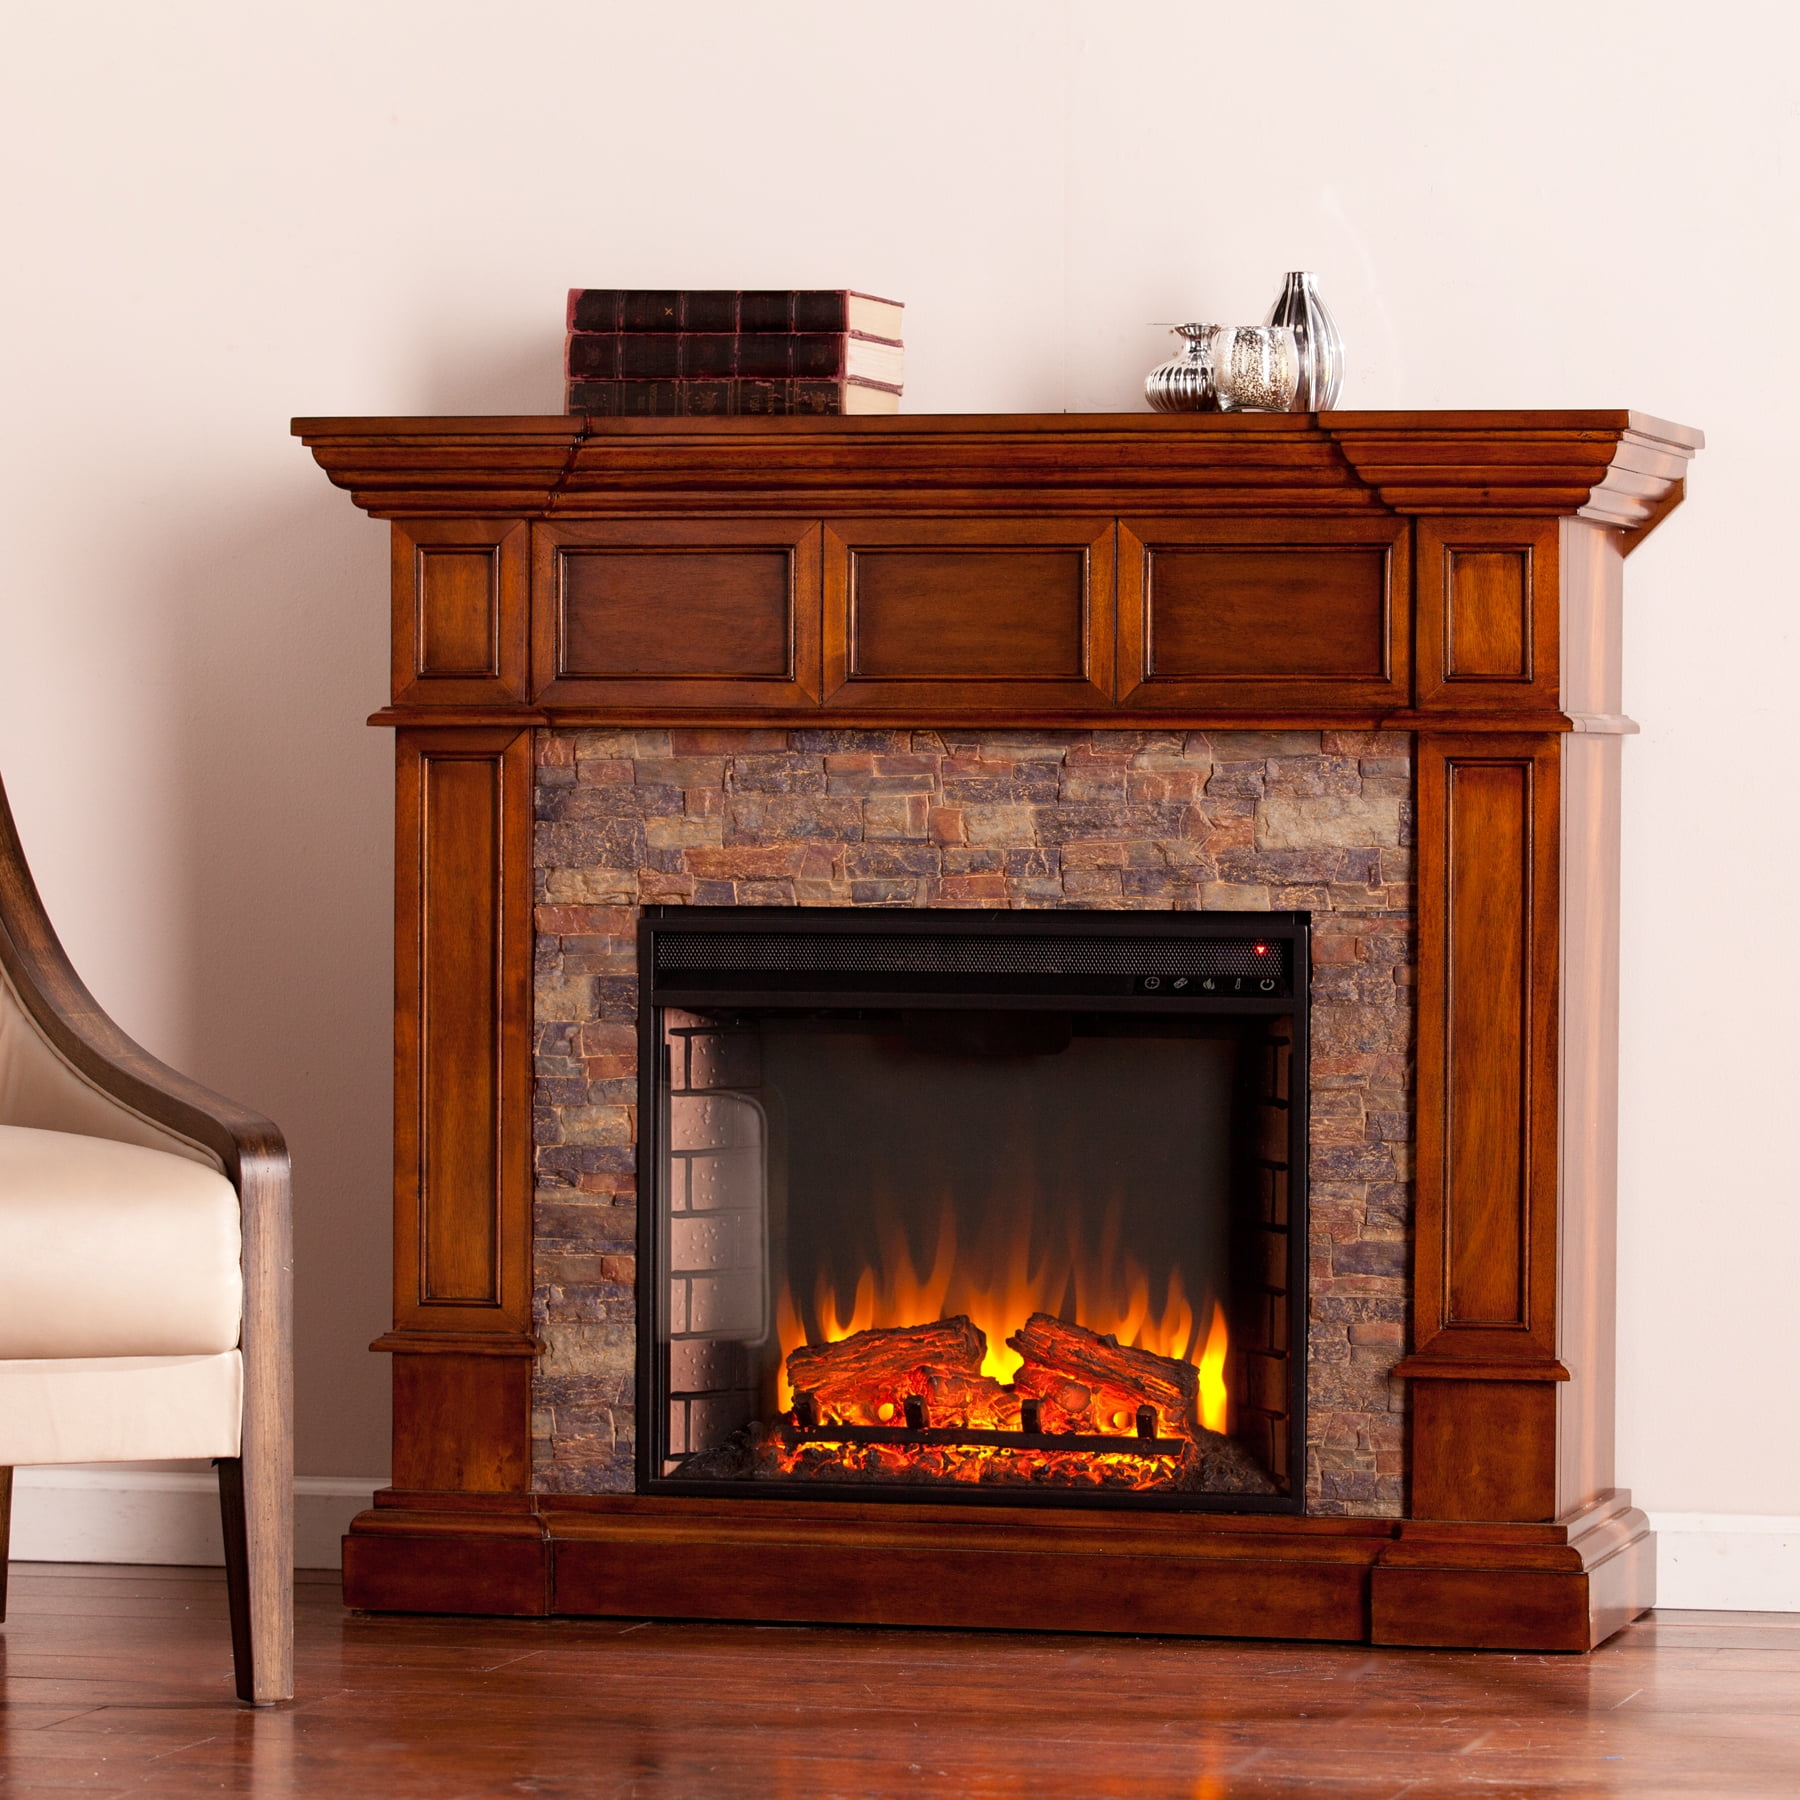 Addao Corner Electric Fireplace With, Faux Stone Corner Fireplace